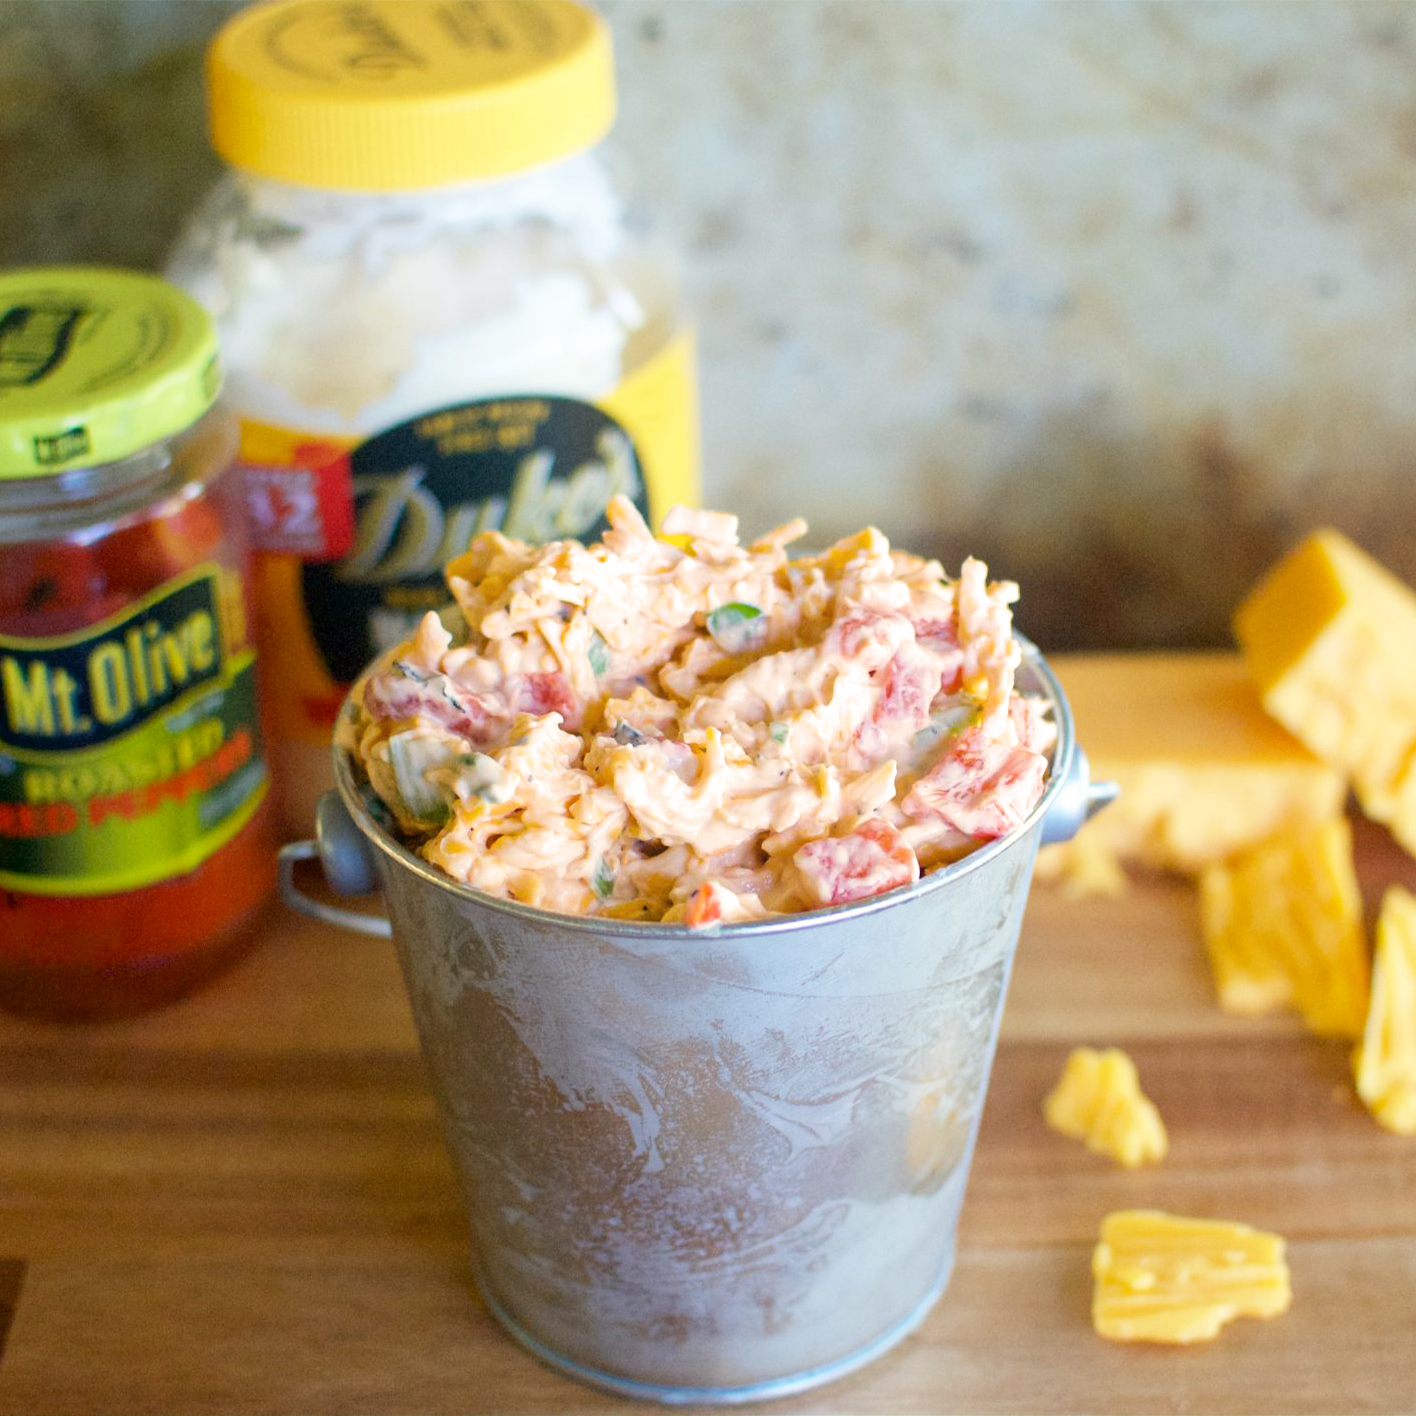 small metal bucket loaded with pimento cheese mixture. background shows jar of Mt. Olive Roasted Red peppers and jar of Duke's Mayo